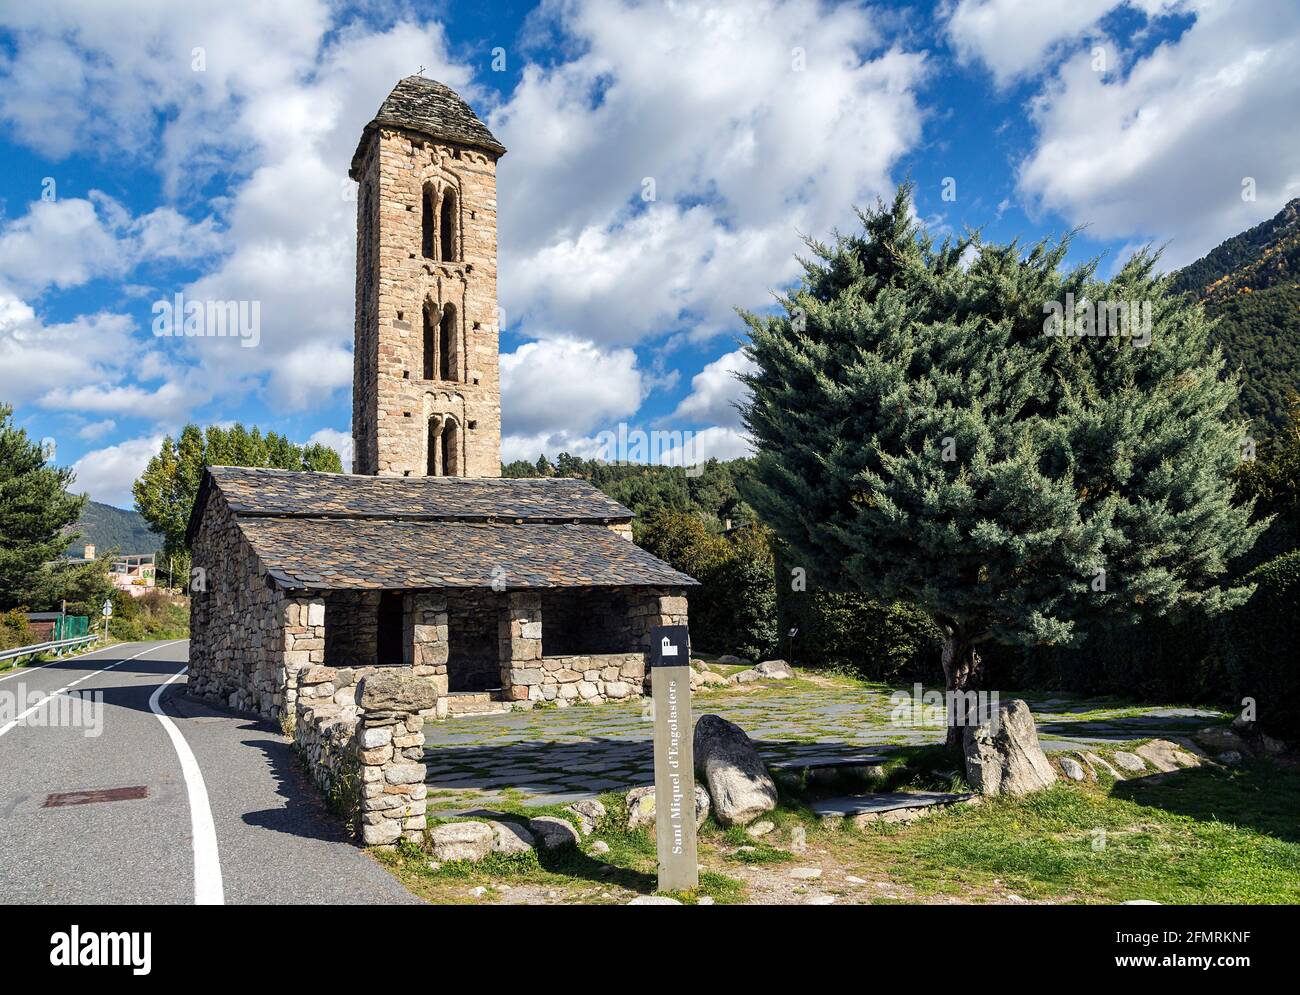 Romanesque church Sant Miquel d Engolasters whose main architectural feature is the bell tower, with stories having mullioned windows and Lombard arch Stock Photo